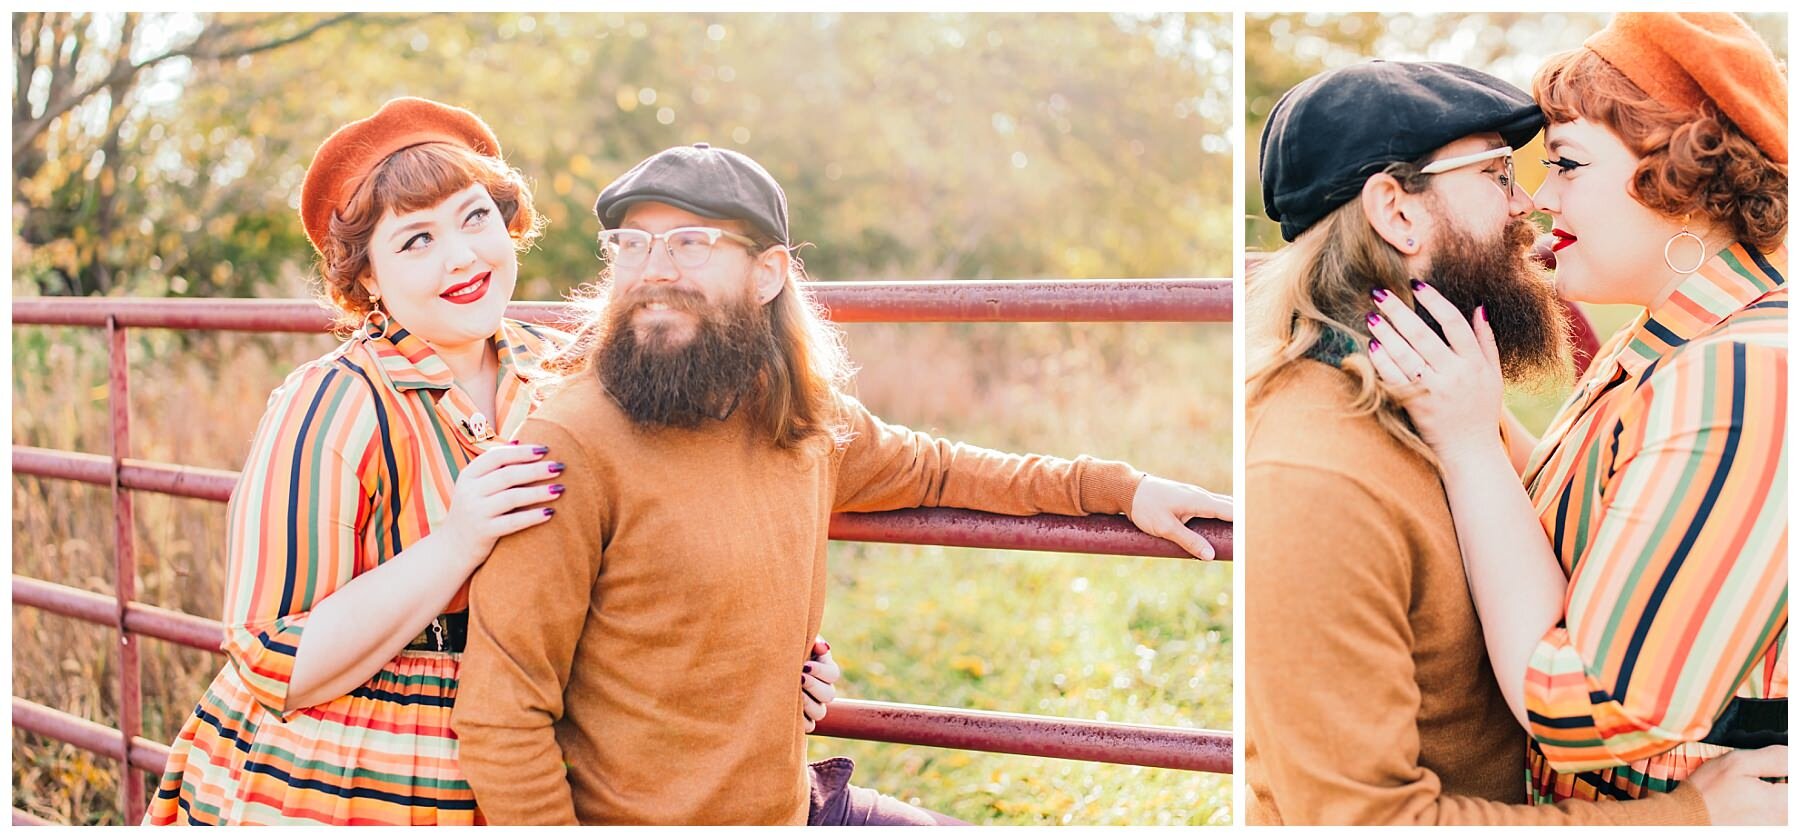 couple cuddling on a fence outside in orange clothing and kissing